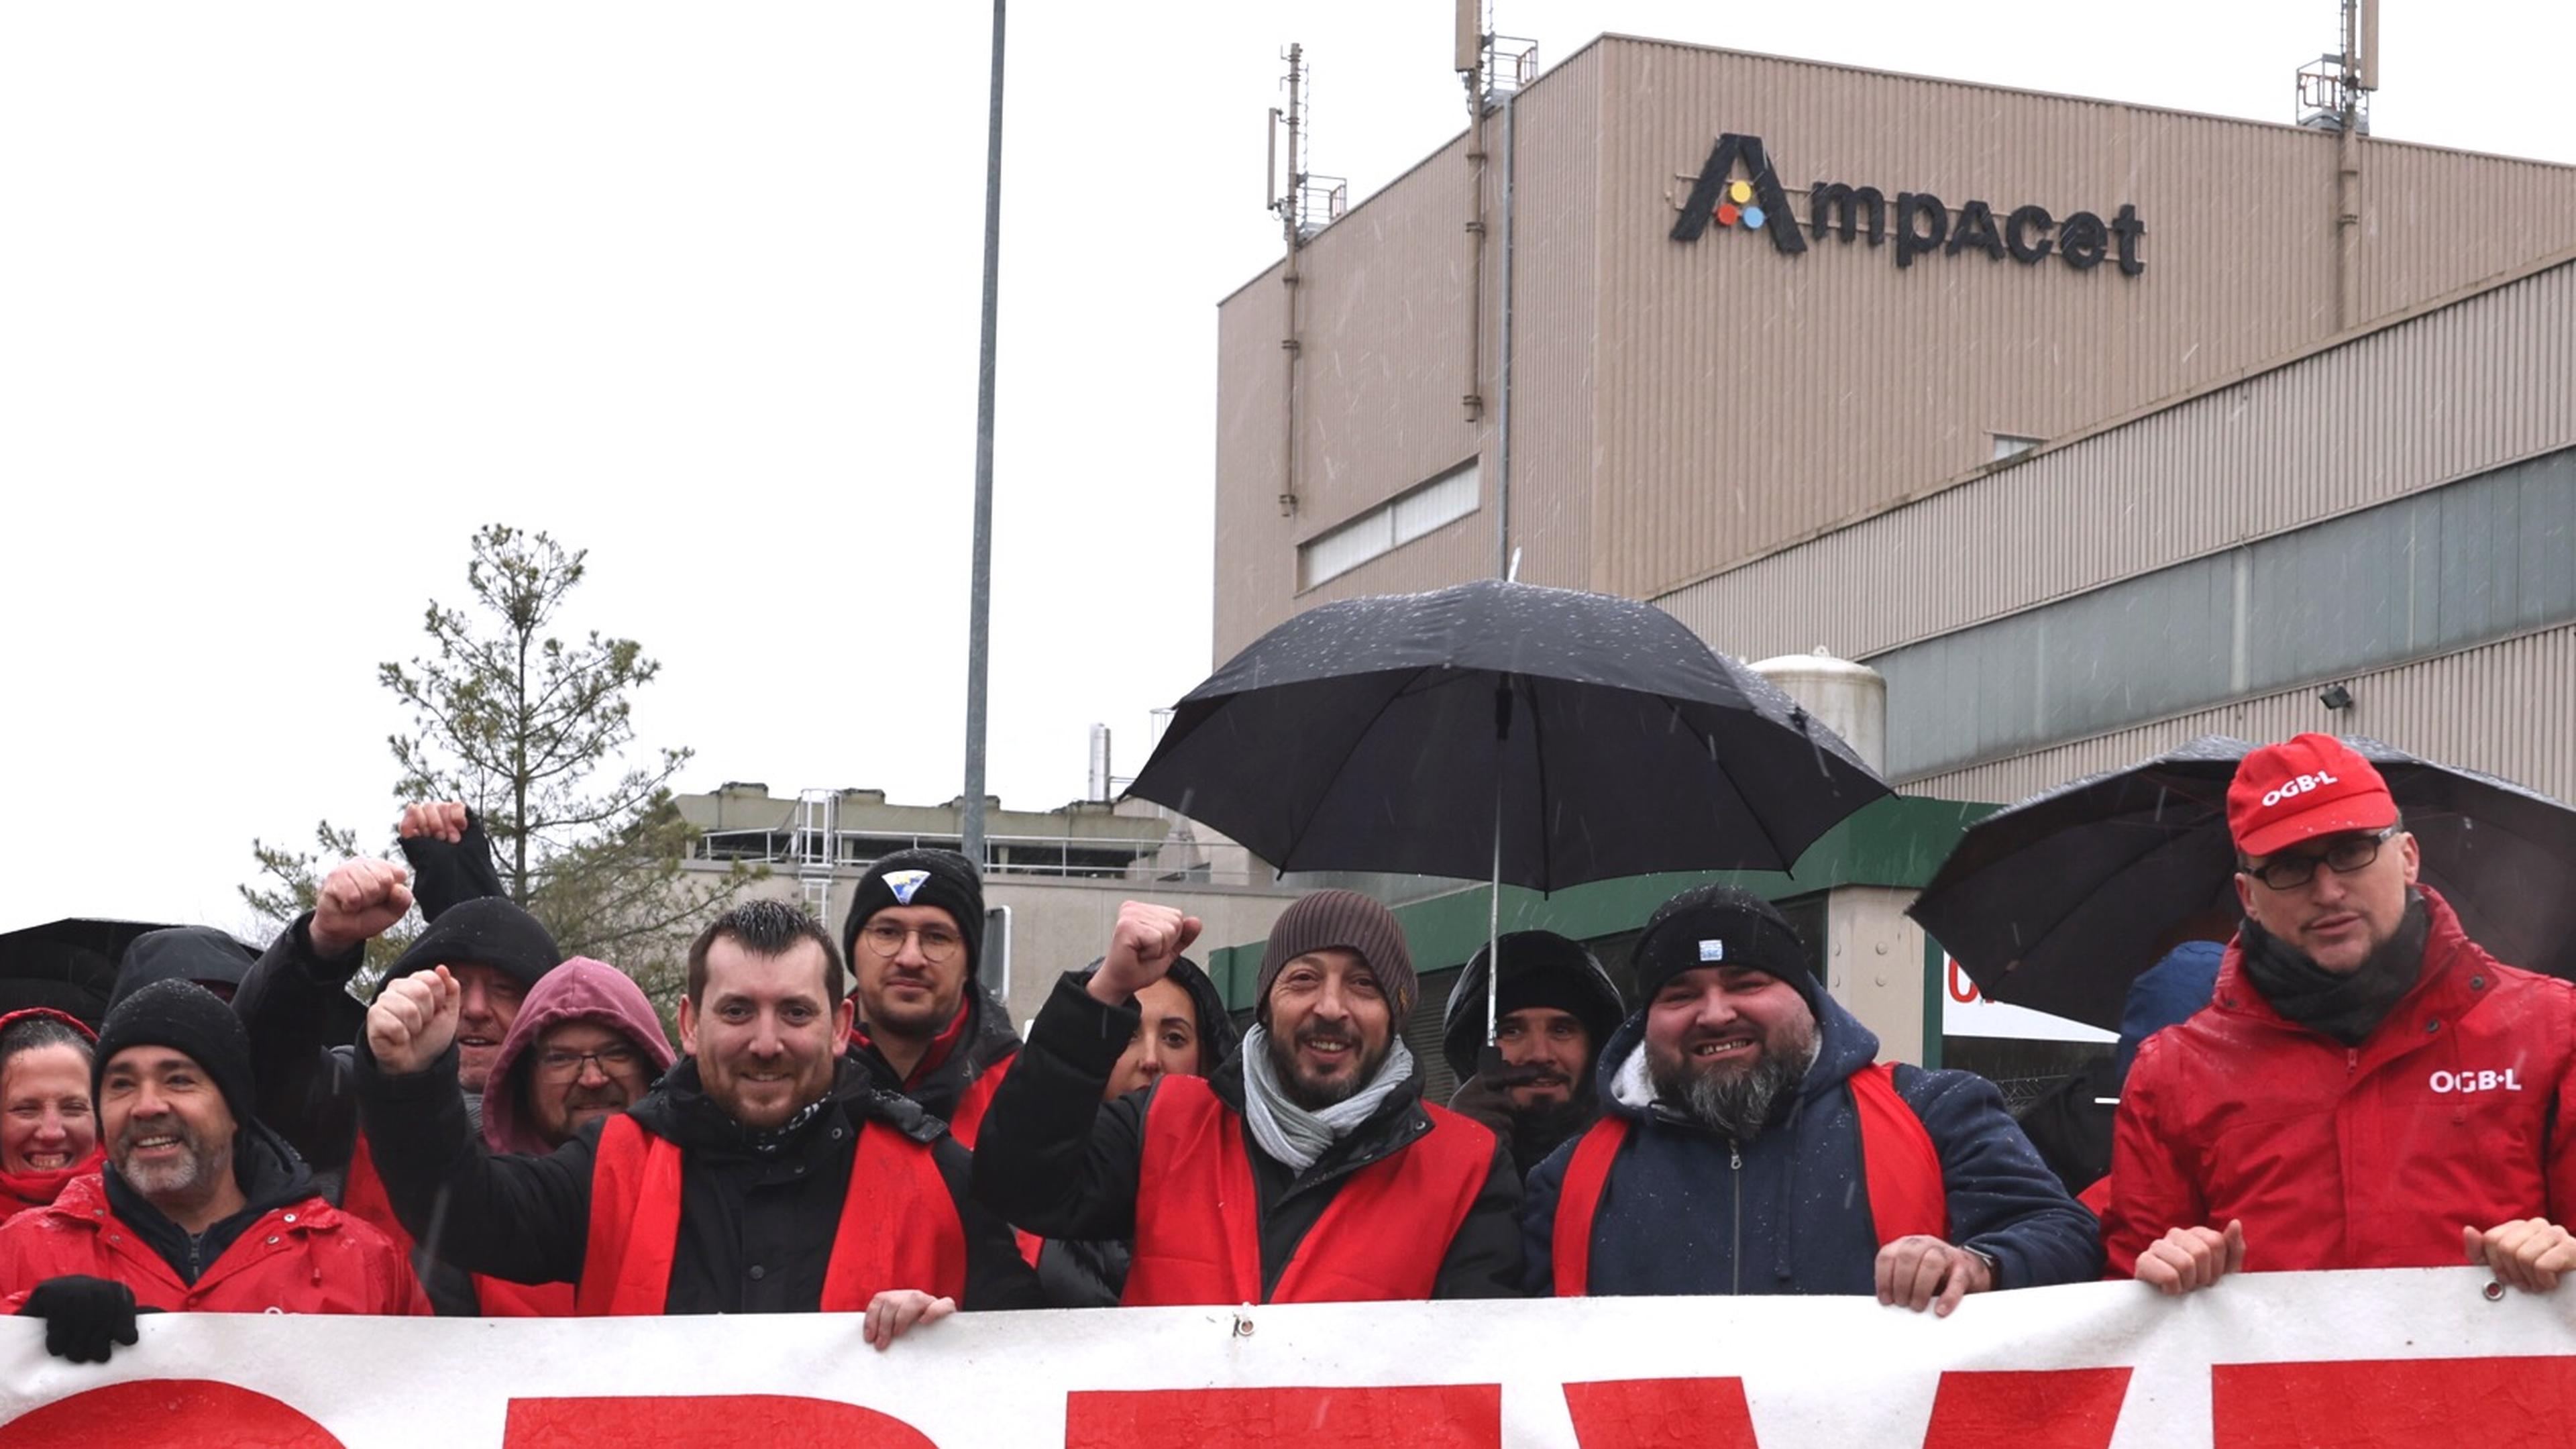 Workers went on strike for almost a full month at Ampacet